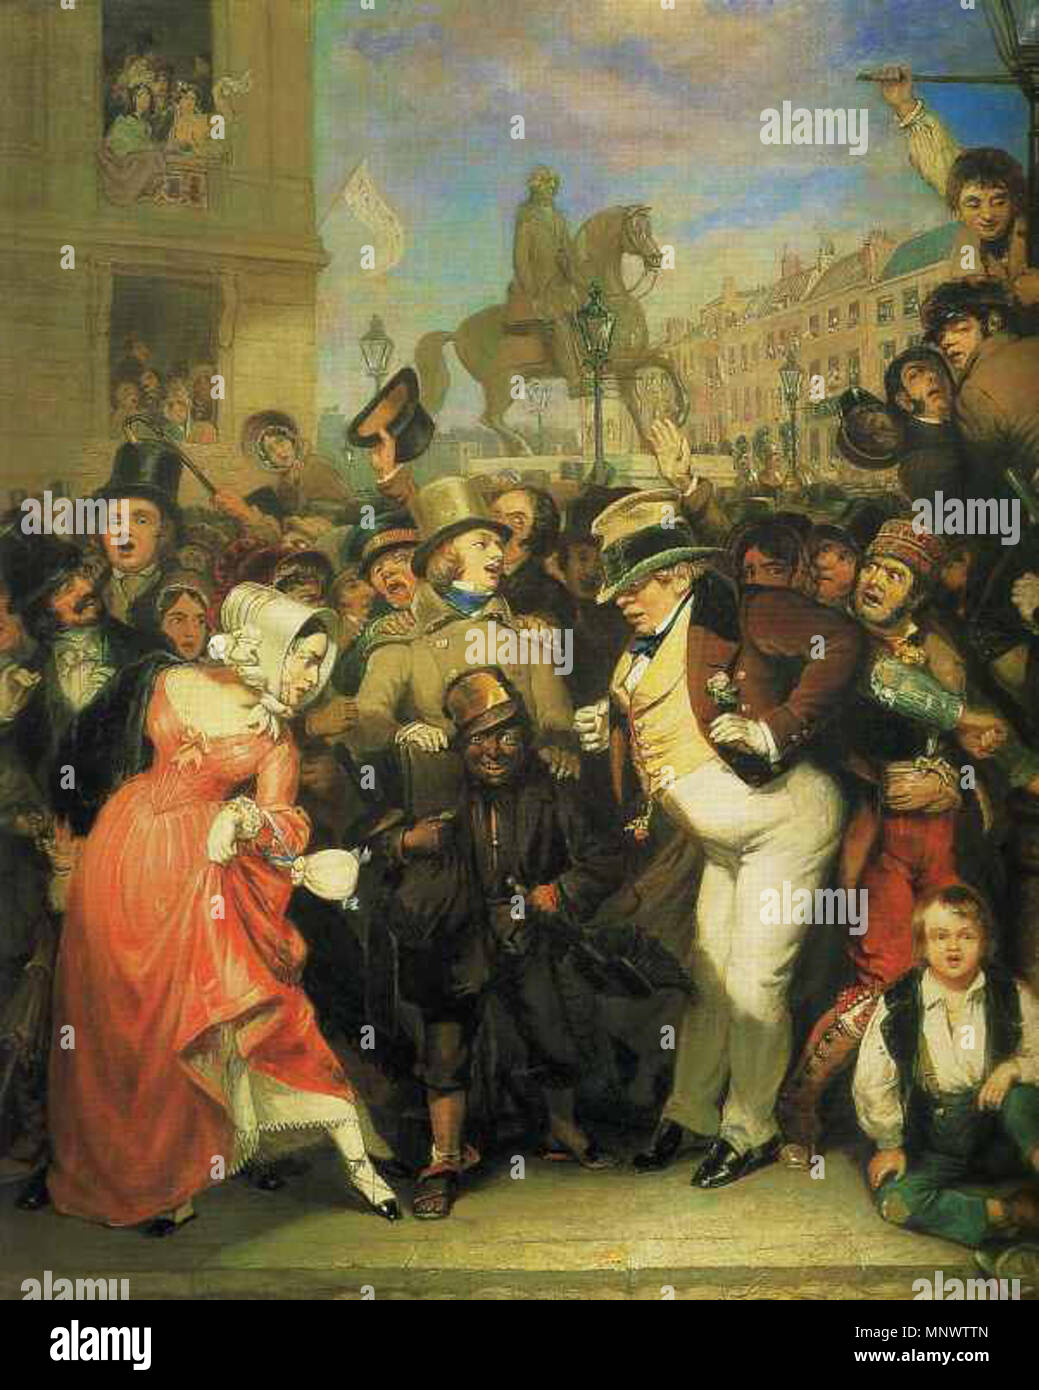 . English: The Crowd . by 1875.   Robert William Buss  (1804–)      Alternative names R. W. Buss  Description British artist and illustrator Victoria-age artist, etcher and illustrator perhaps best known for his painting Dickens' Dream.  Date of birth/death 4 August 1804 26 February 1875 / 29 August 1875  Location of birth/death Aldersgate London  Work period 1820s-1870s  Work location United Kingdom  Authority control  : Q921595 VIAF: 27338492 ISNI: 0000 0001 0961 7128 ULAN: 500005610 LCCN: n86144044 GND: 123635608 WorldCat 1068 Robert William Buss The Crowd Stock Photo